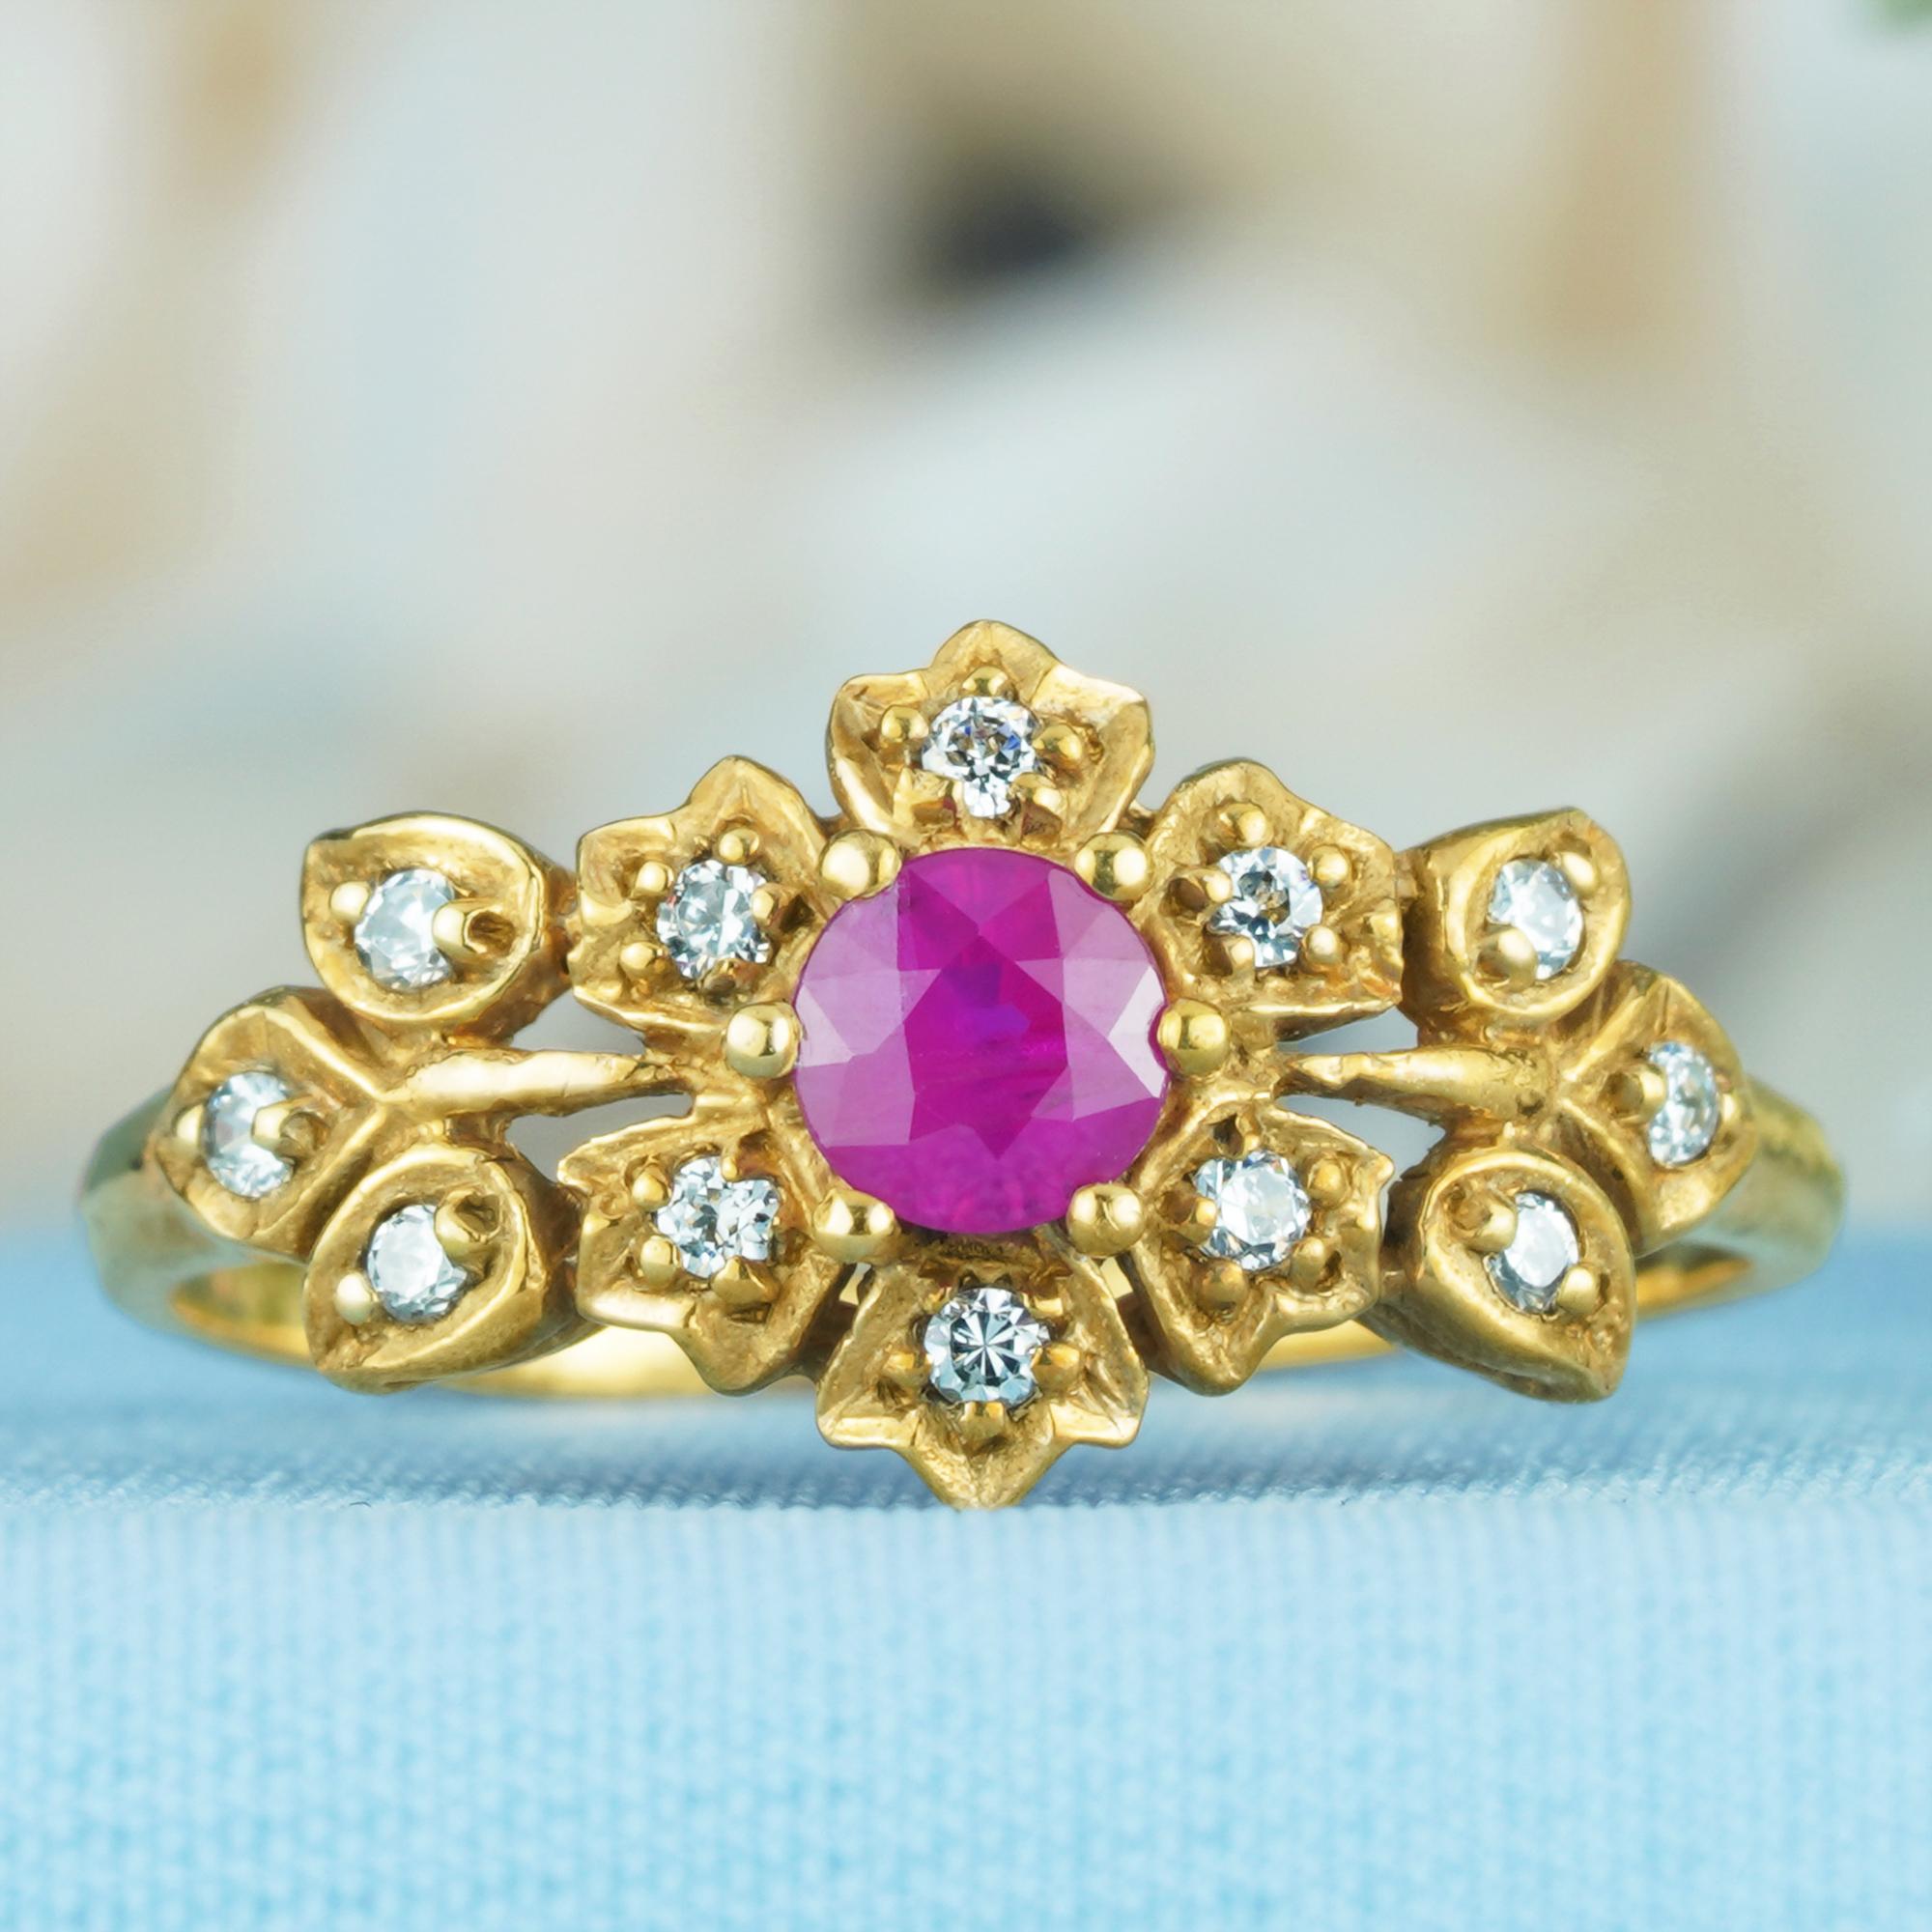 Add a delicate and unique aesthetic to your hand with this ring by GEMMA FILIGREE. Our antique design gold rings equate to delicacy and light openwork, while maintains strength for everyday wear for a lifetime.
This striking design ring with floral